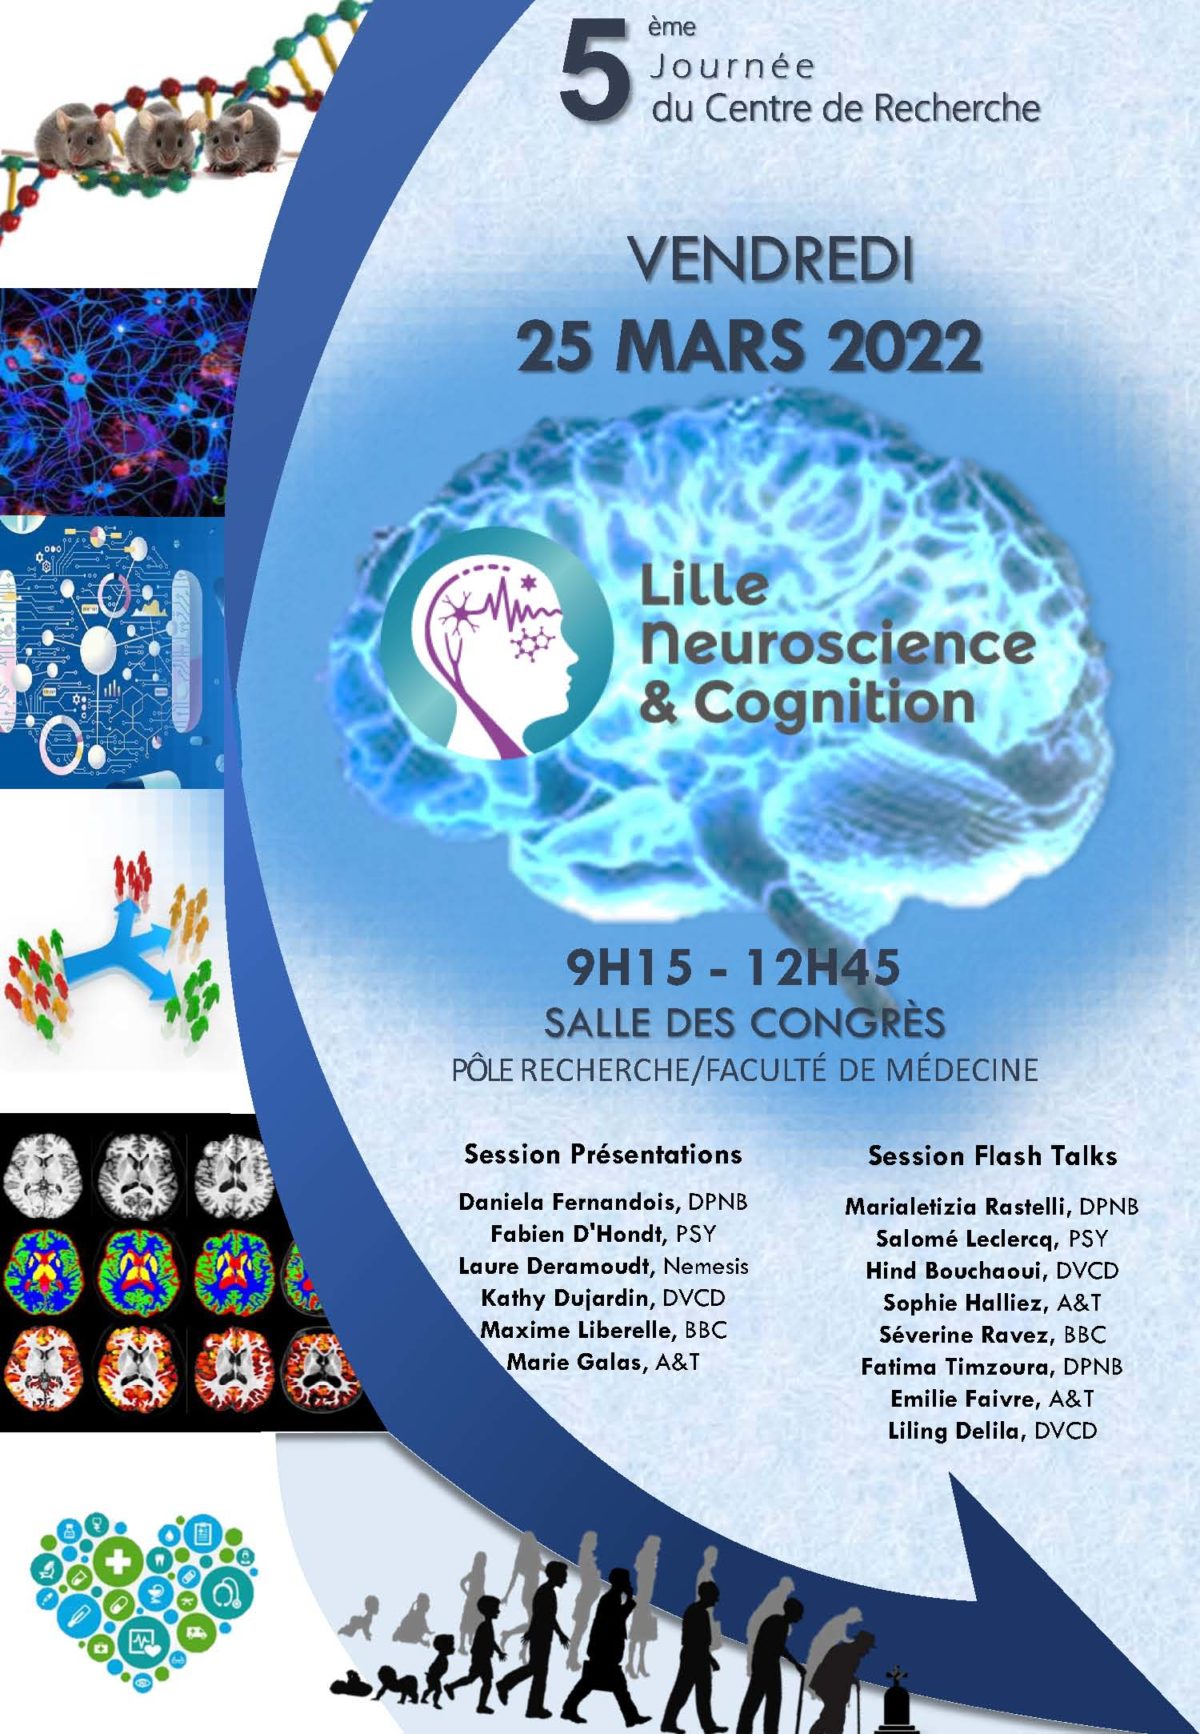 5th Center Day, March 25th 2022, at the “Pôle recherche, salle des congrès” from 9.15 am to 12.45